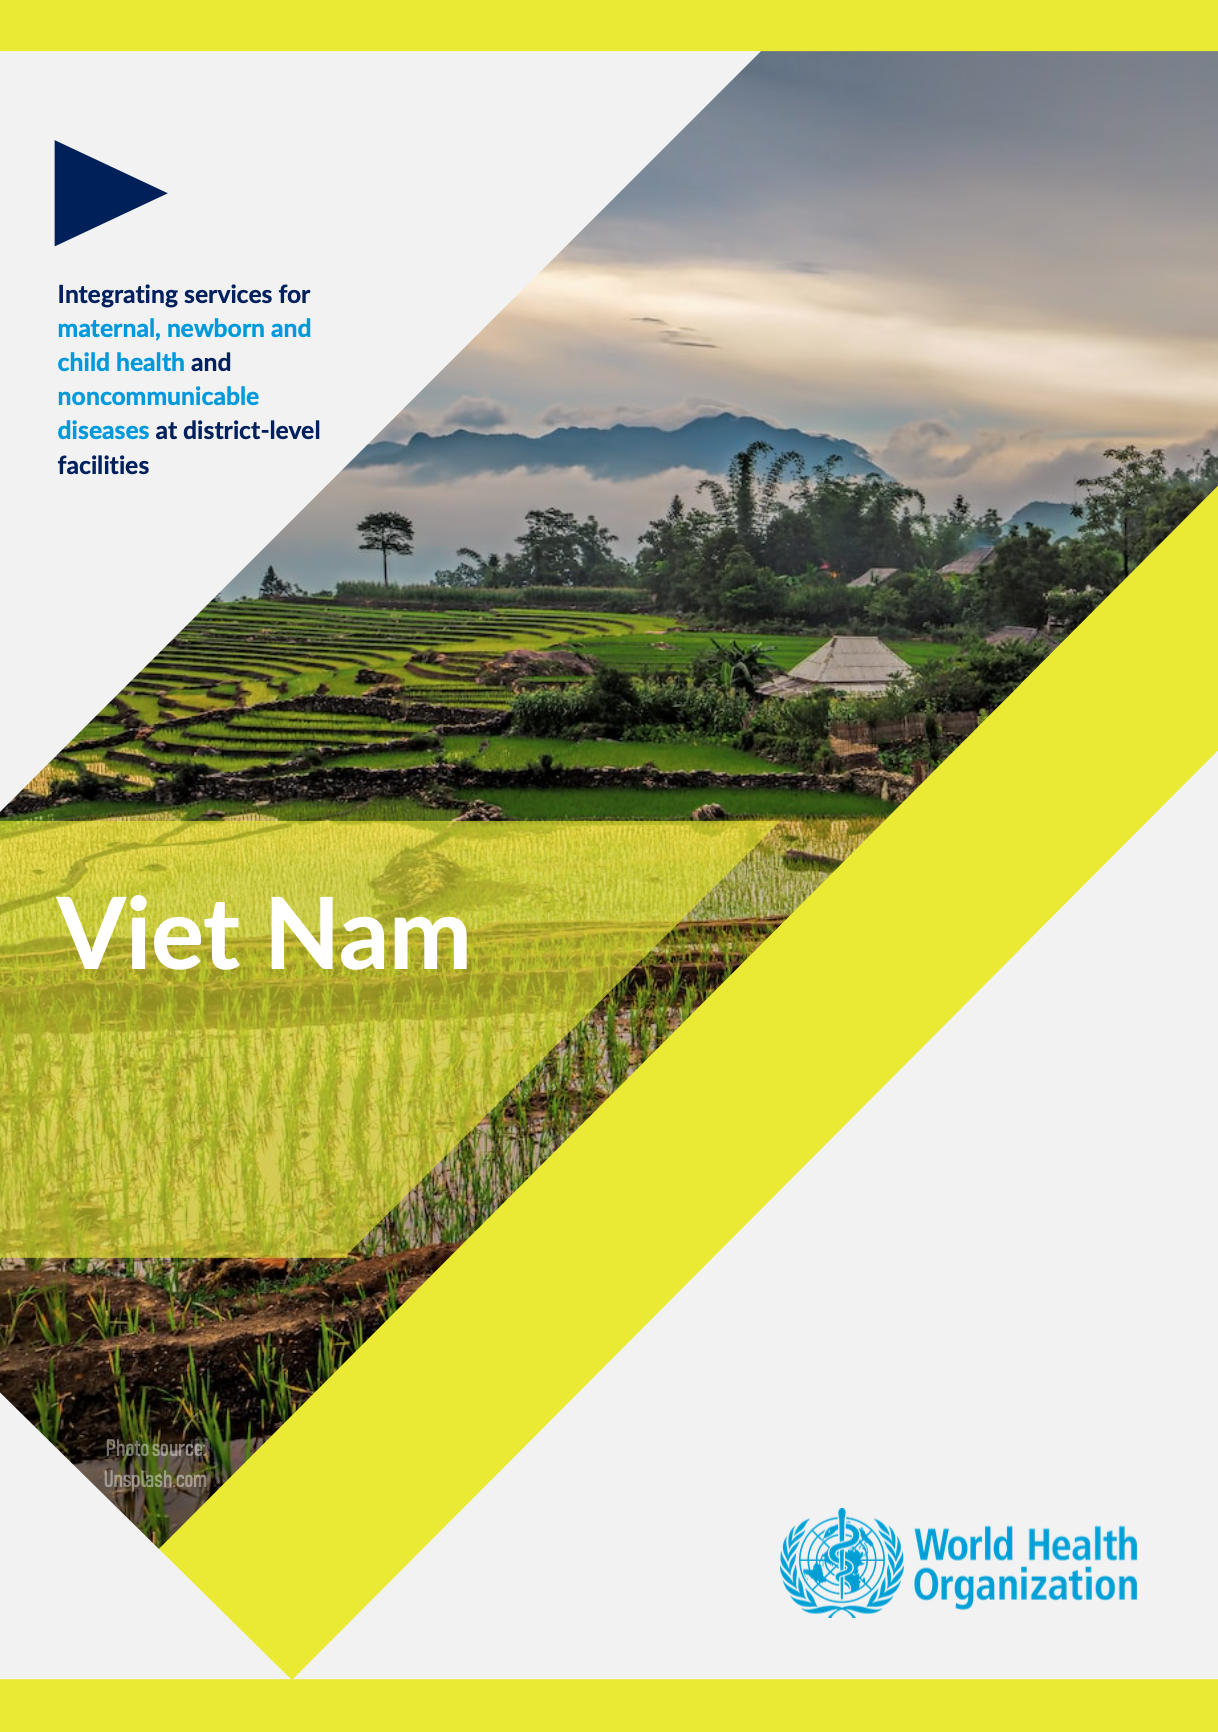 Integrating services for maternal, newborn and child health and noncommunicable diseases at district-level facilities: Viet Nam